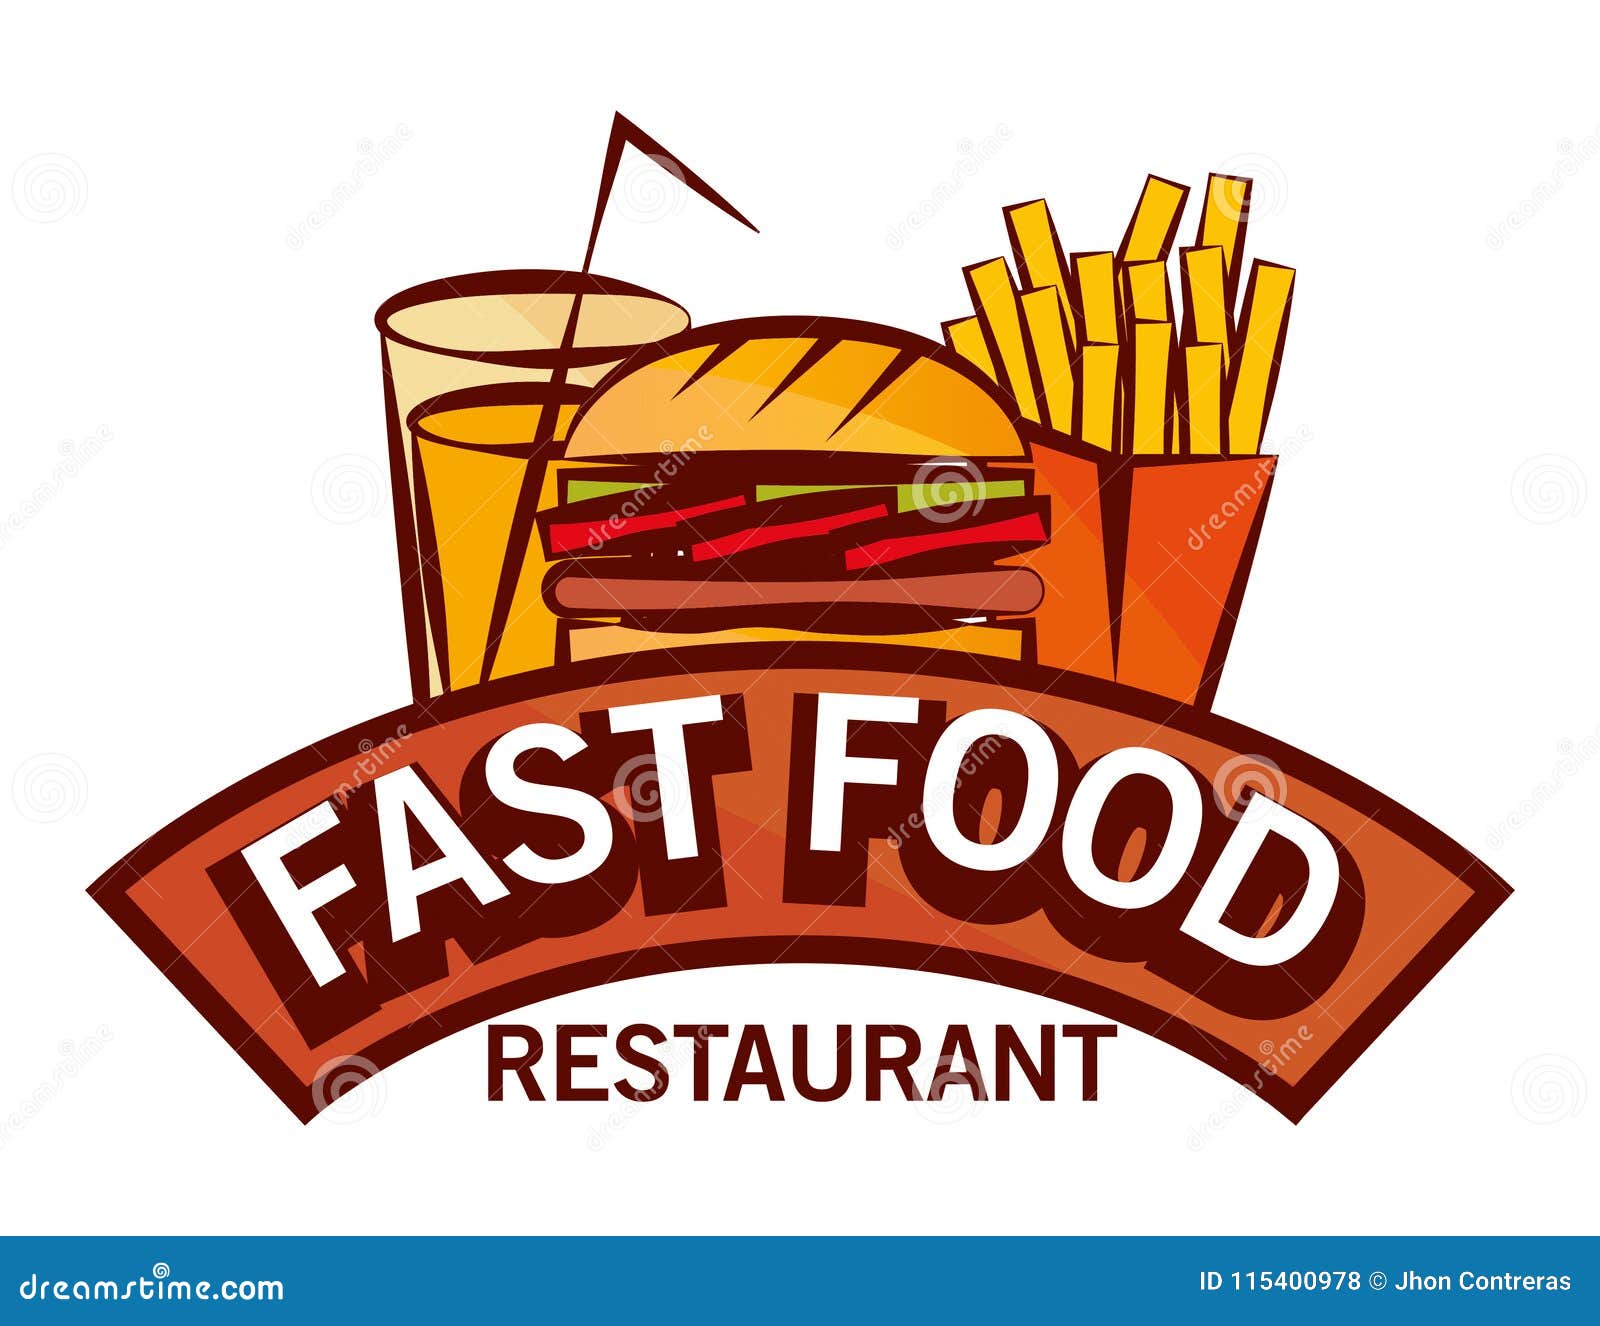 corporate image for fast food store